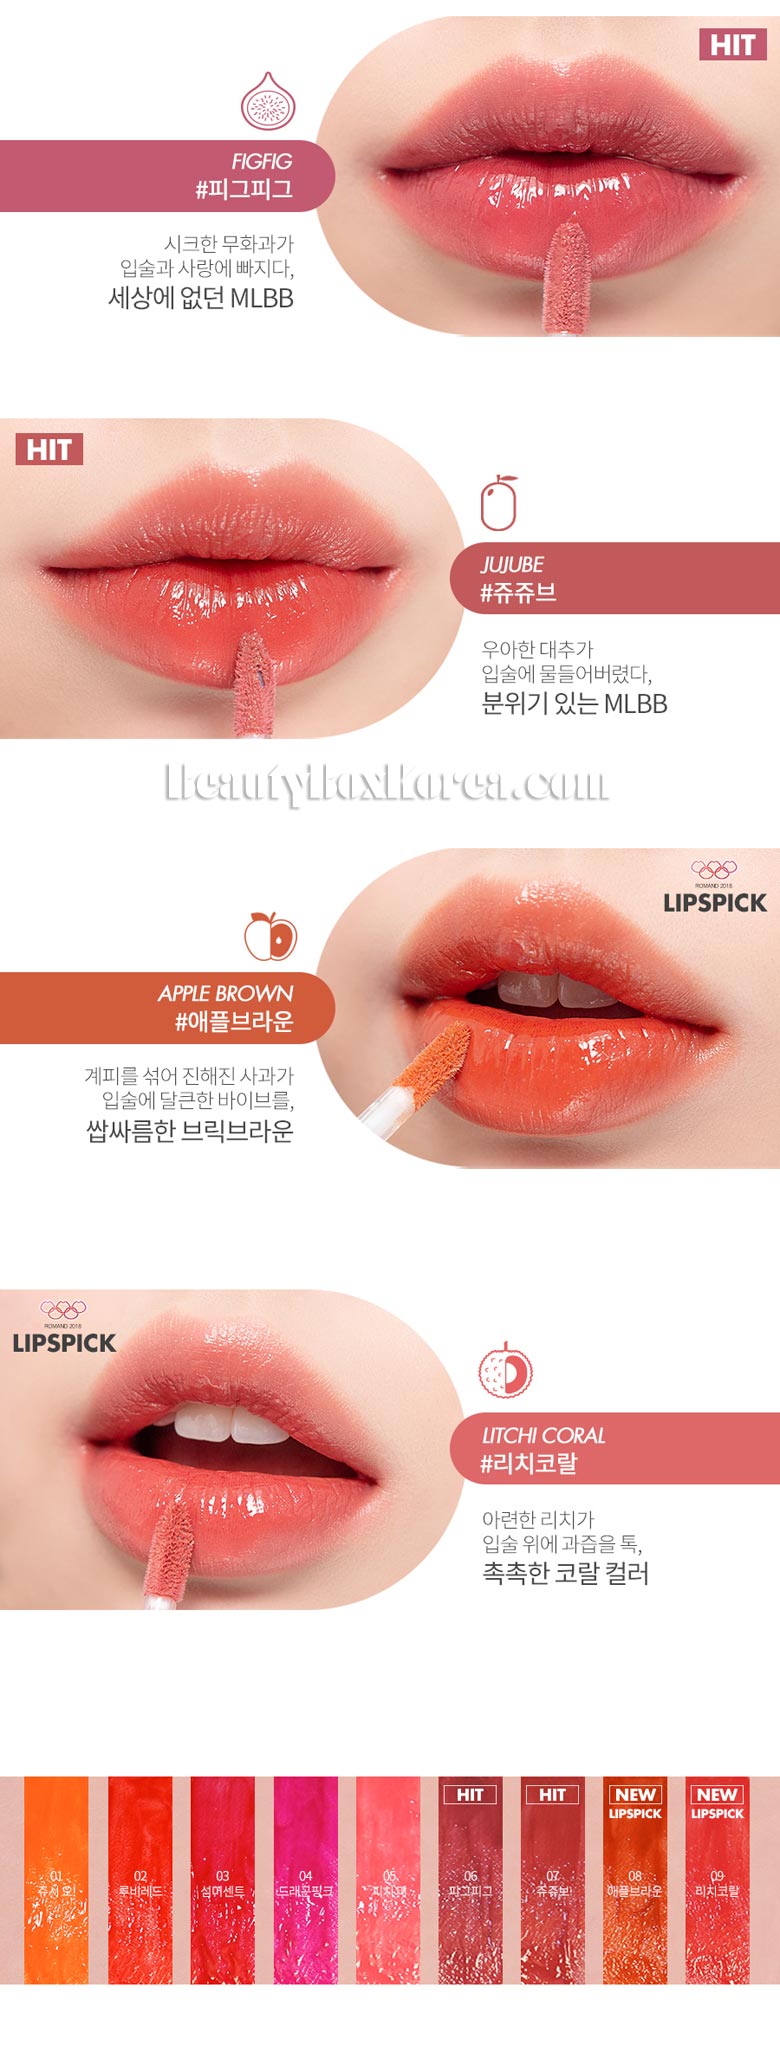 ROMAND Juicy Lasting Lip Tint 4.8g | Best Price and Fast Shipping from  Beauty Box Korea